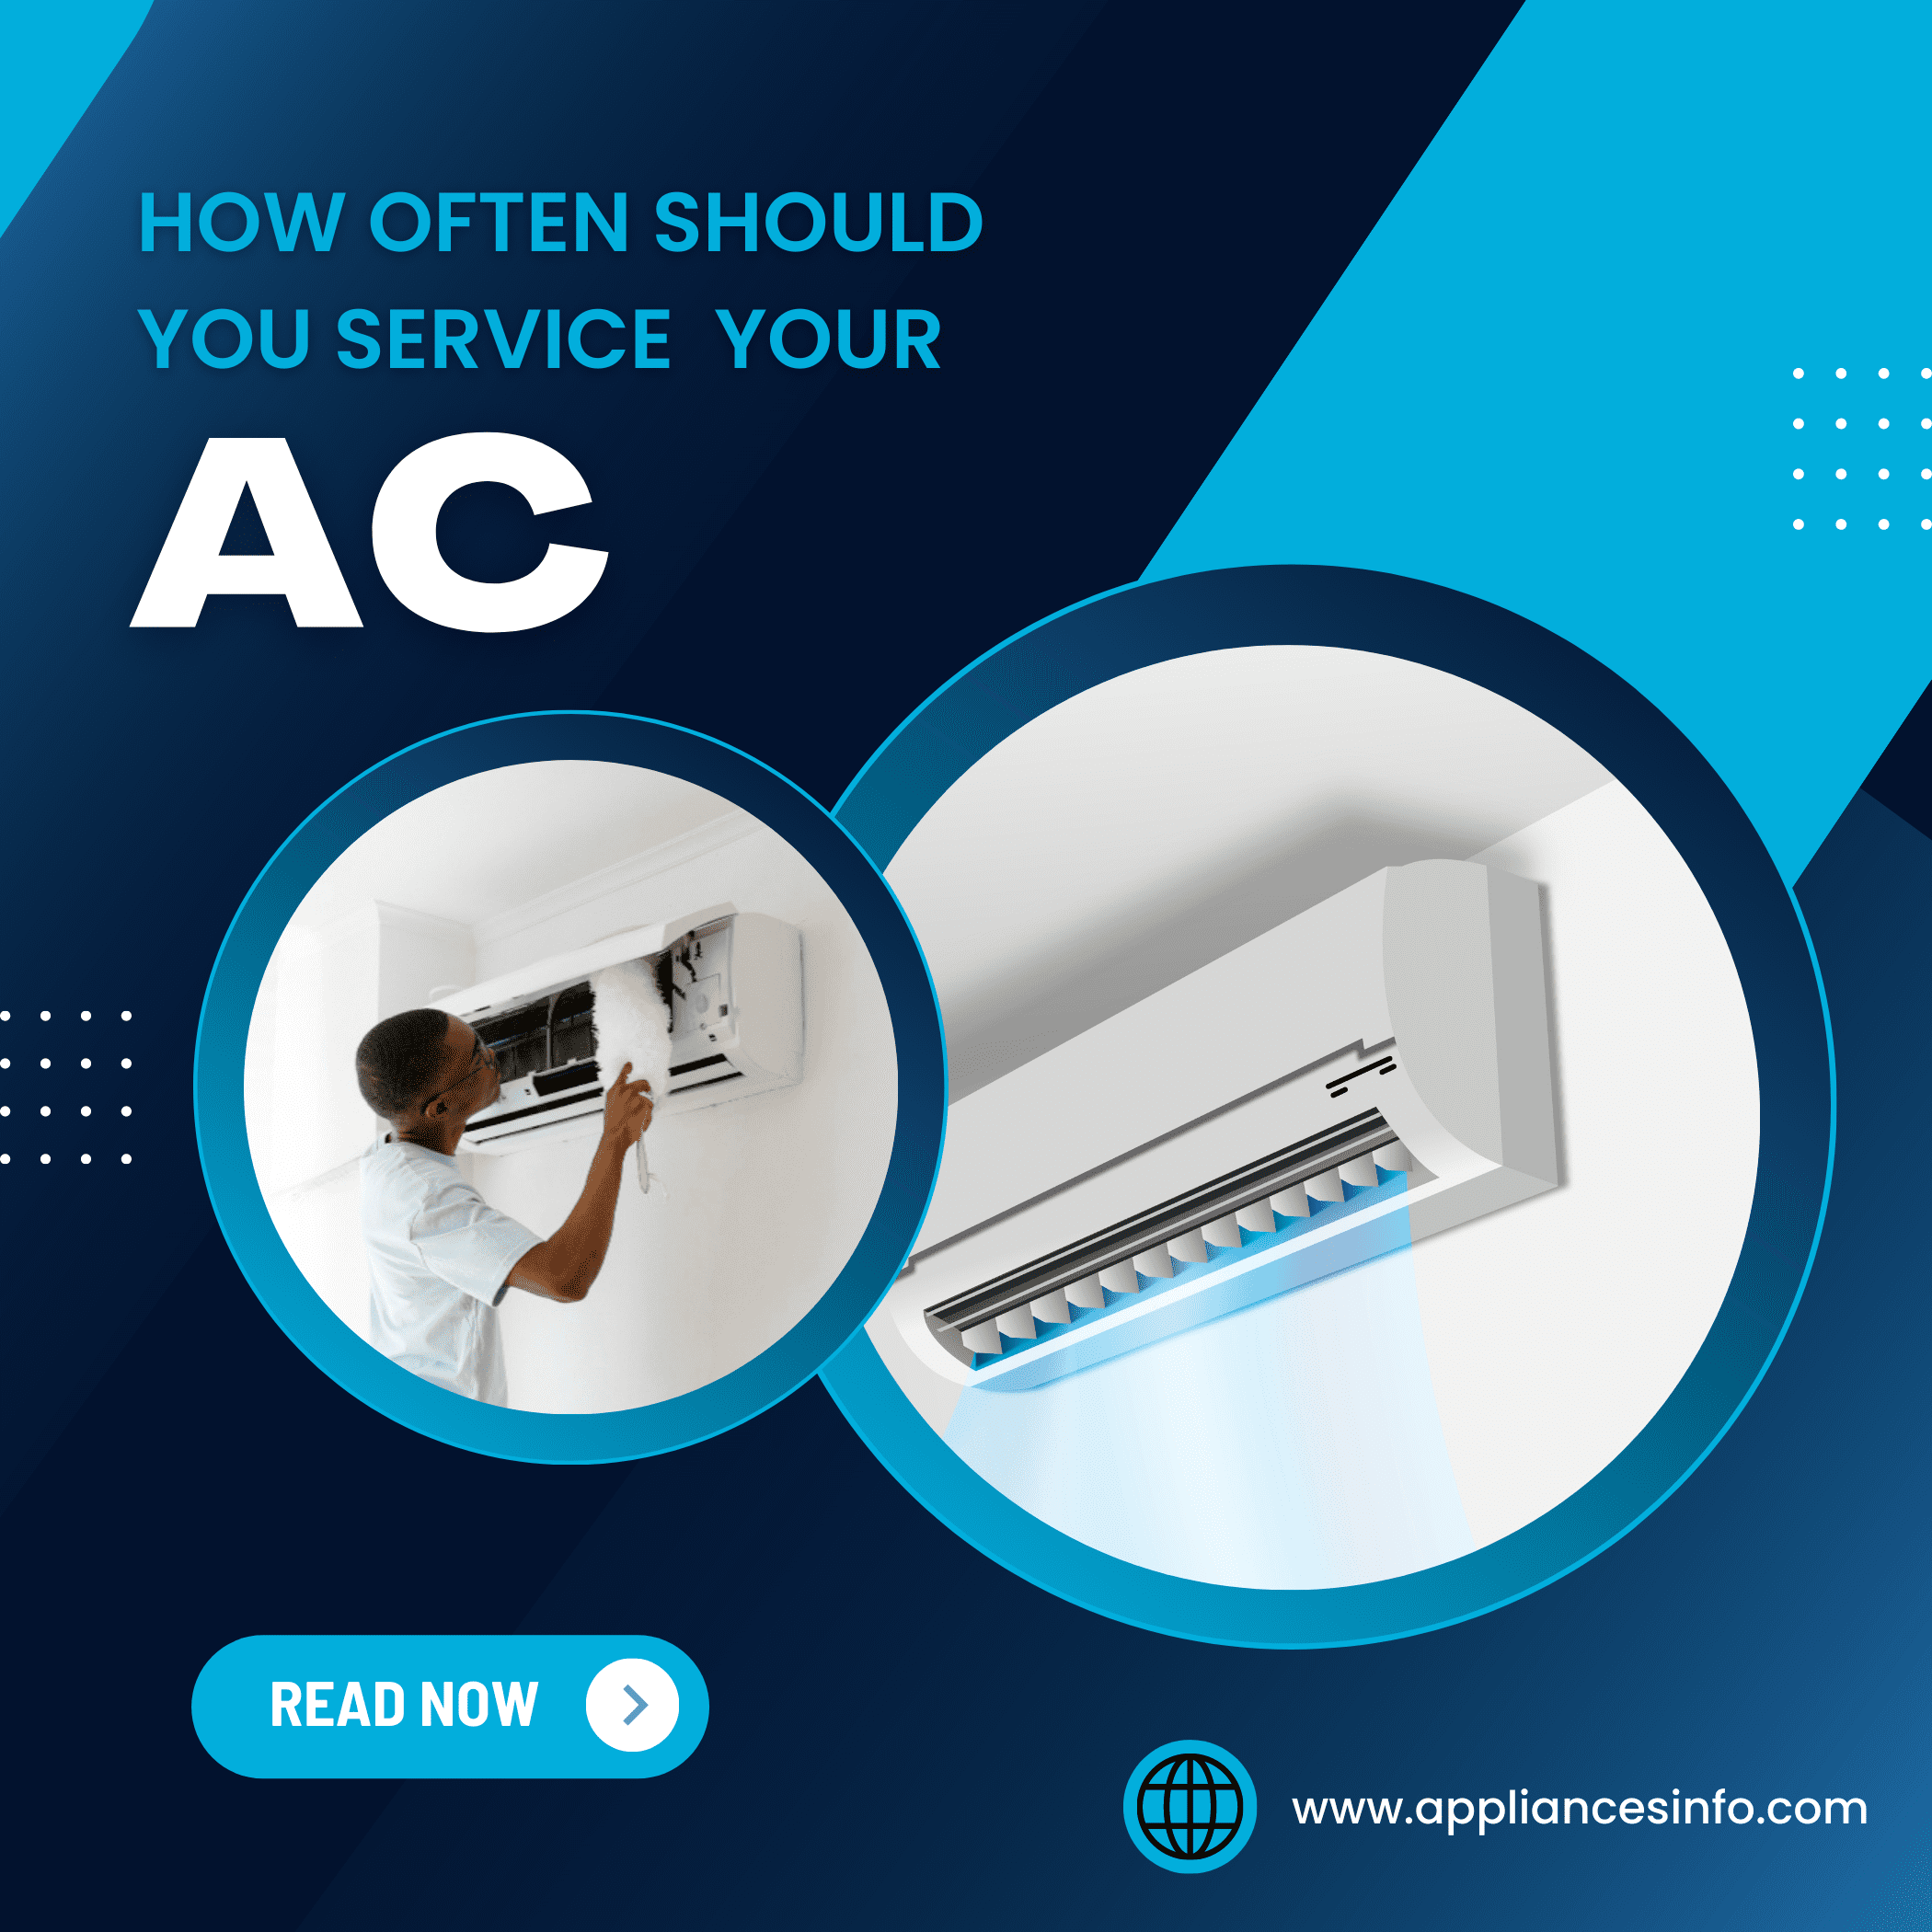 How often should you service your AC?